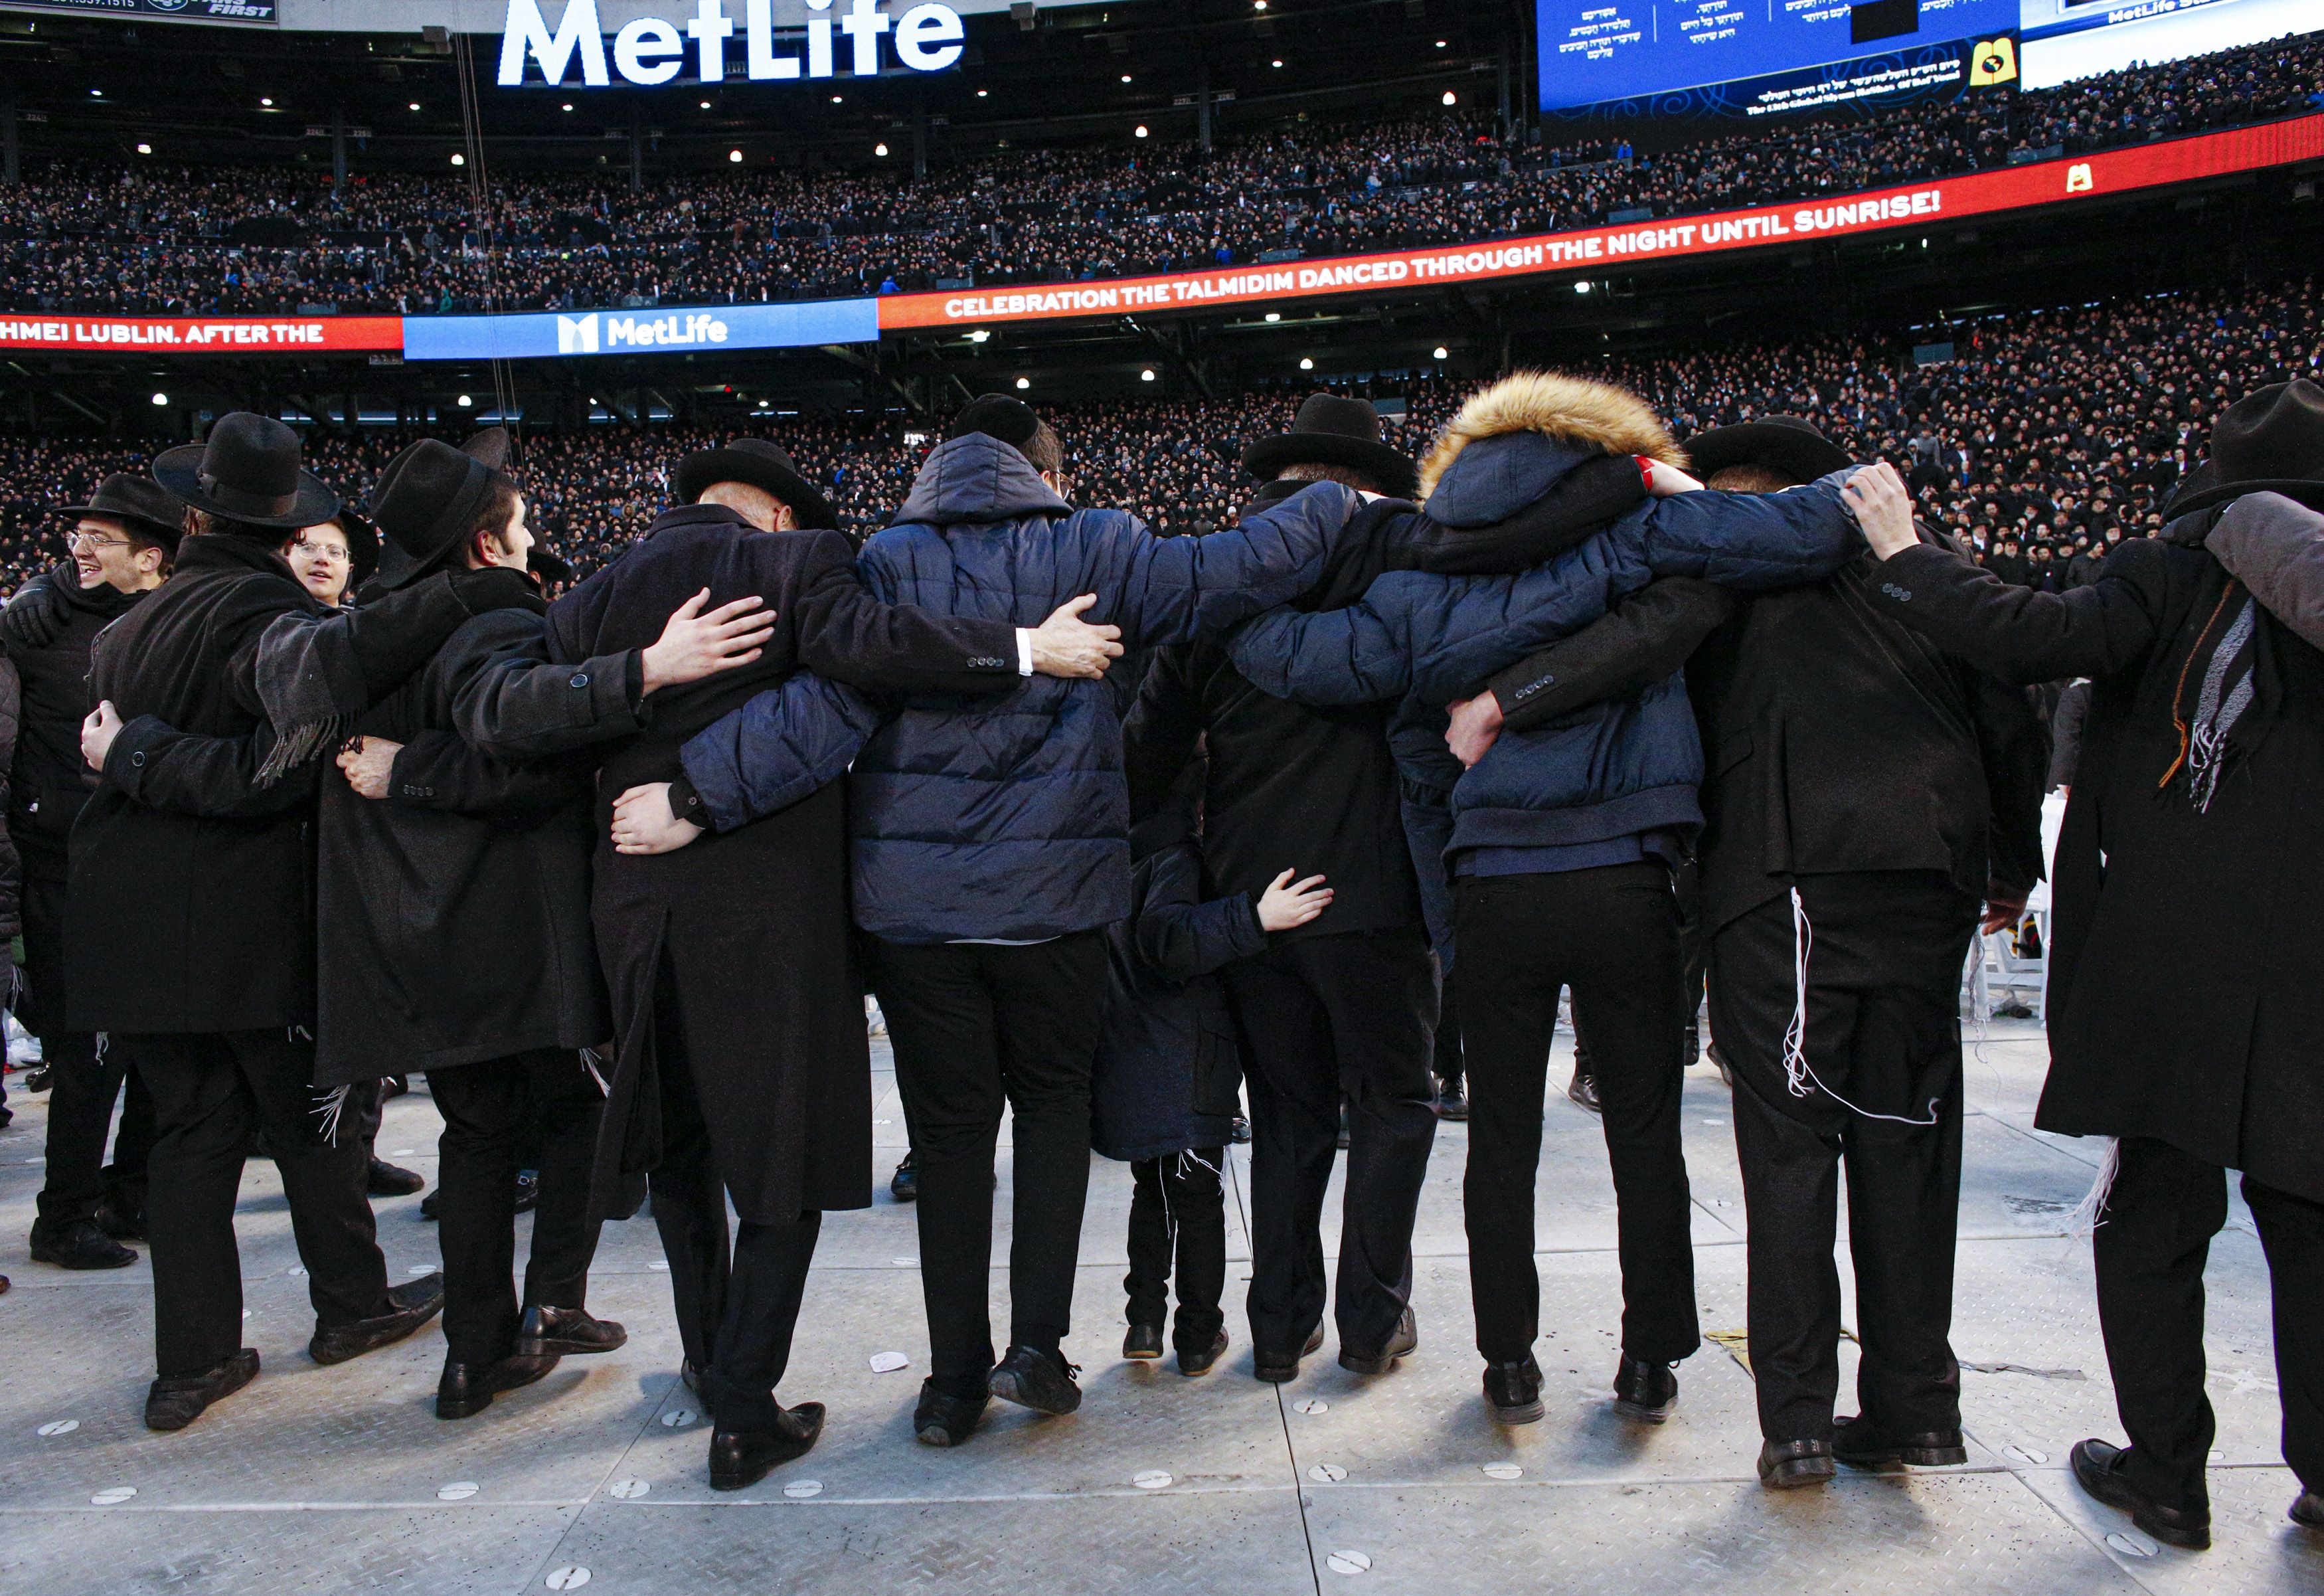 Men dance as they gather with others in MetLife Stadium on January 1, 2020, in East Rutherford